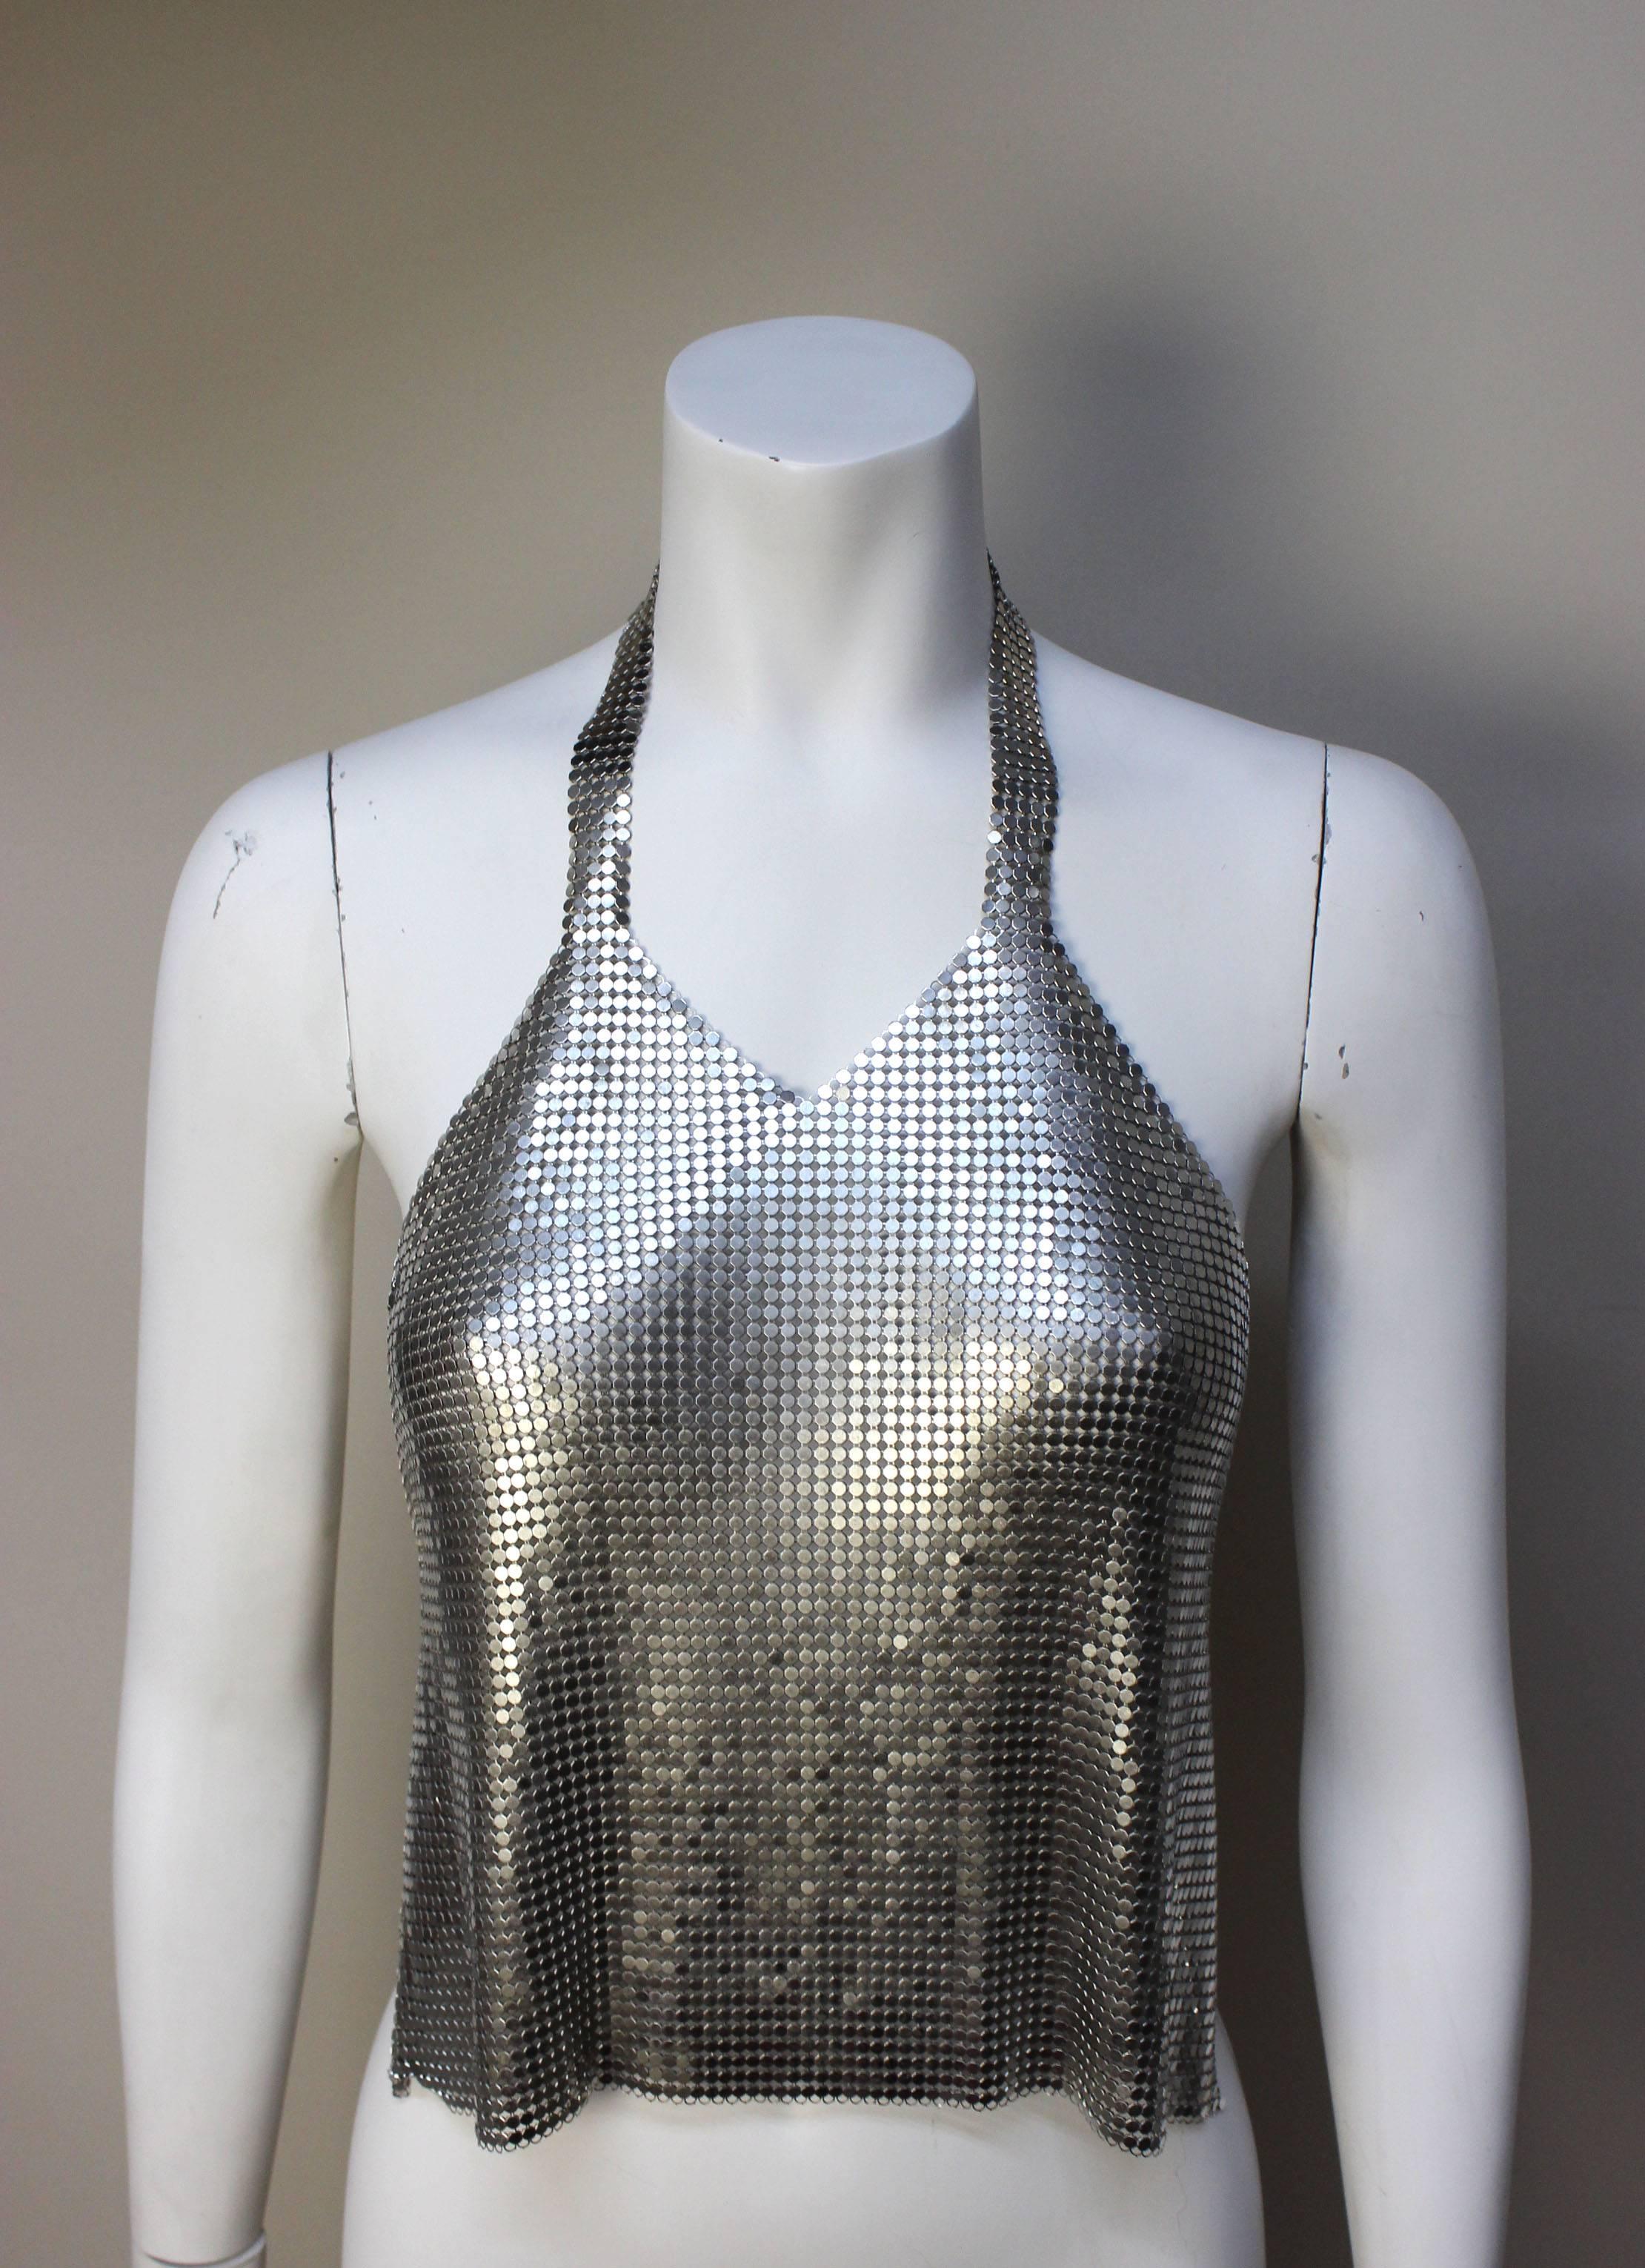 This sexy silver chain mesh top is an original from the 1970's. It's the quintessential disco era garment. It drapes fluidly across the front of the body, held in place by a chain halter top & a chain across the bare back. 